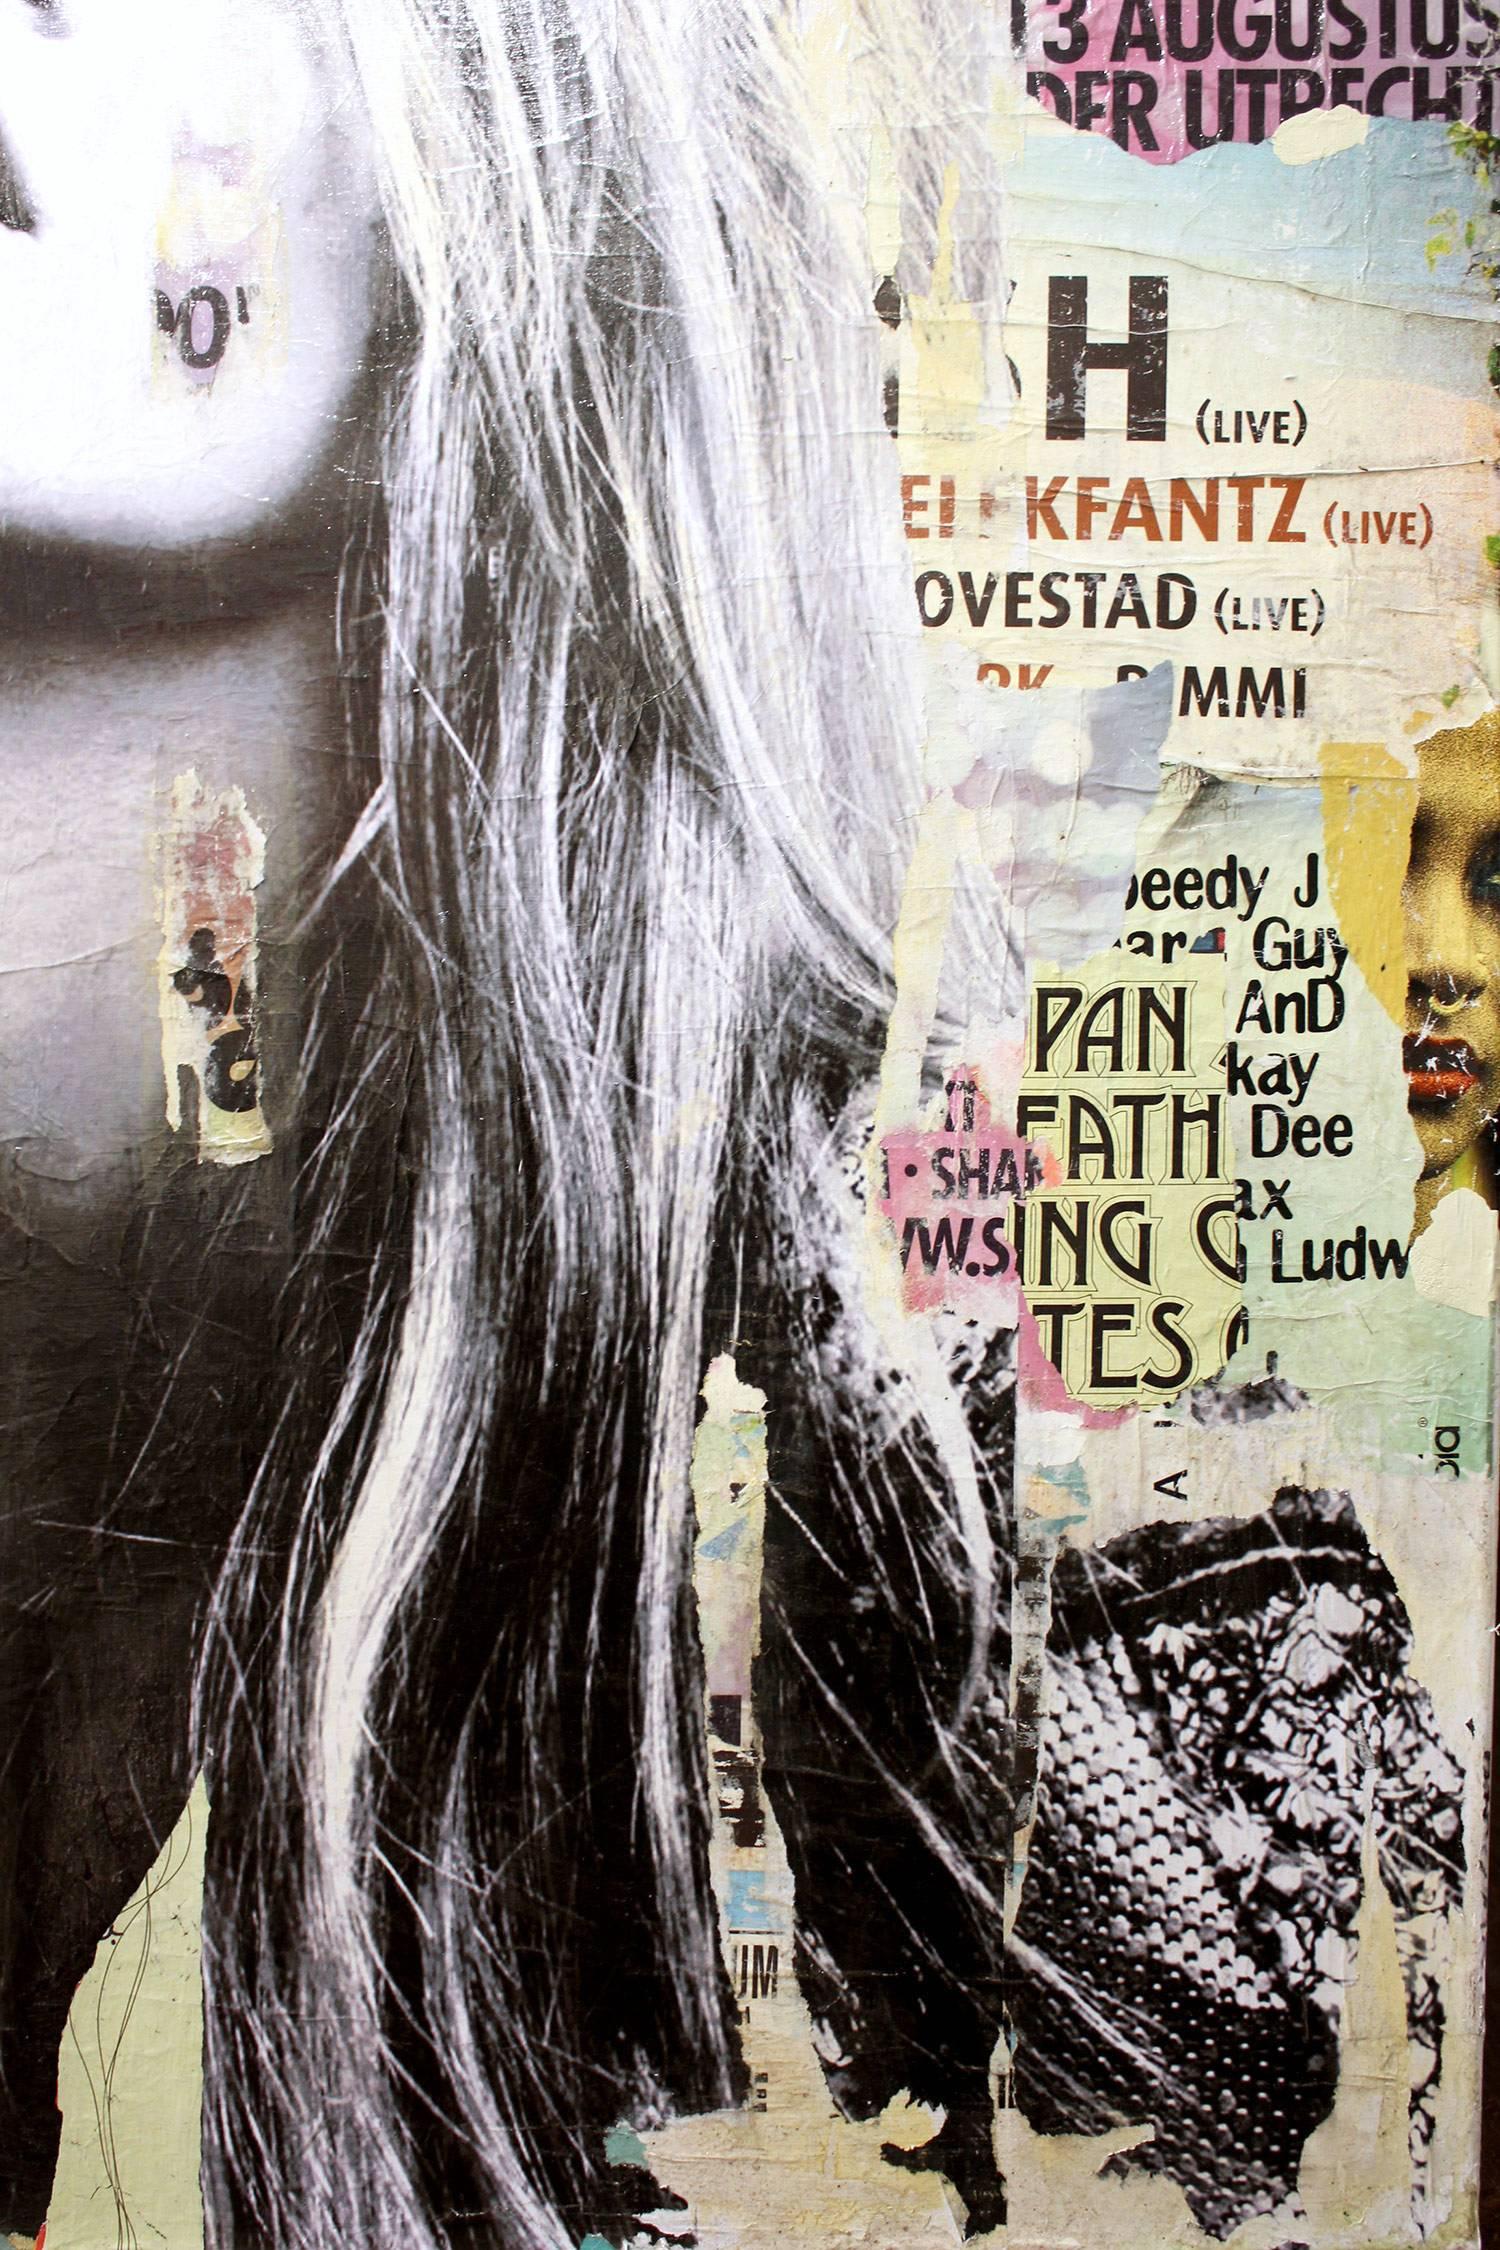 This piece depicts famous English model Kate Moss. Done with beautiful expressive colors and a distinctive street art design, this piece pops with energy and a romantic beauty. It is a large canvas that makes a wonderful statement and has an edgy